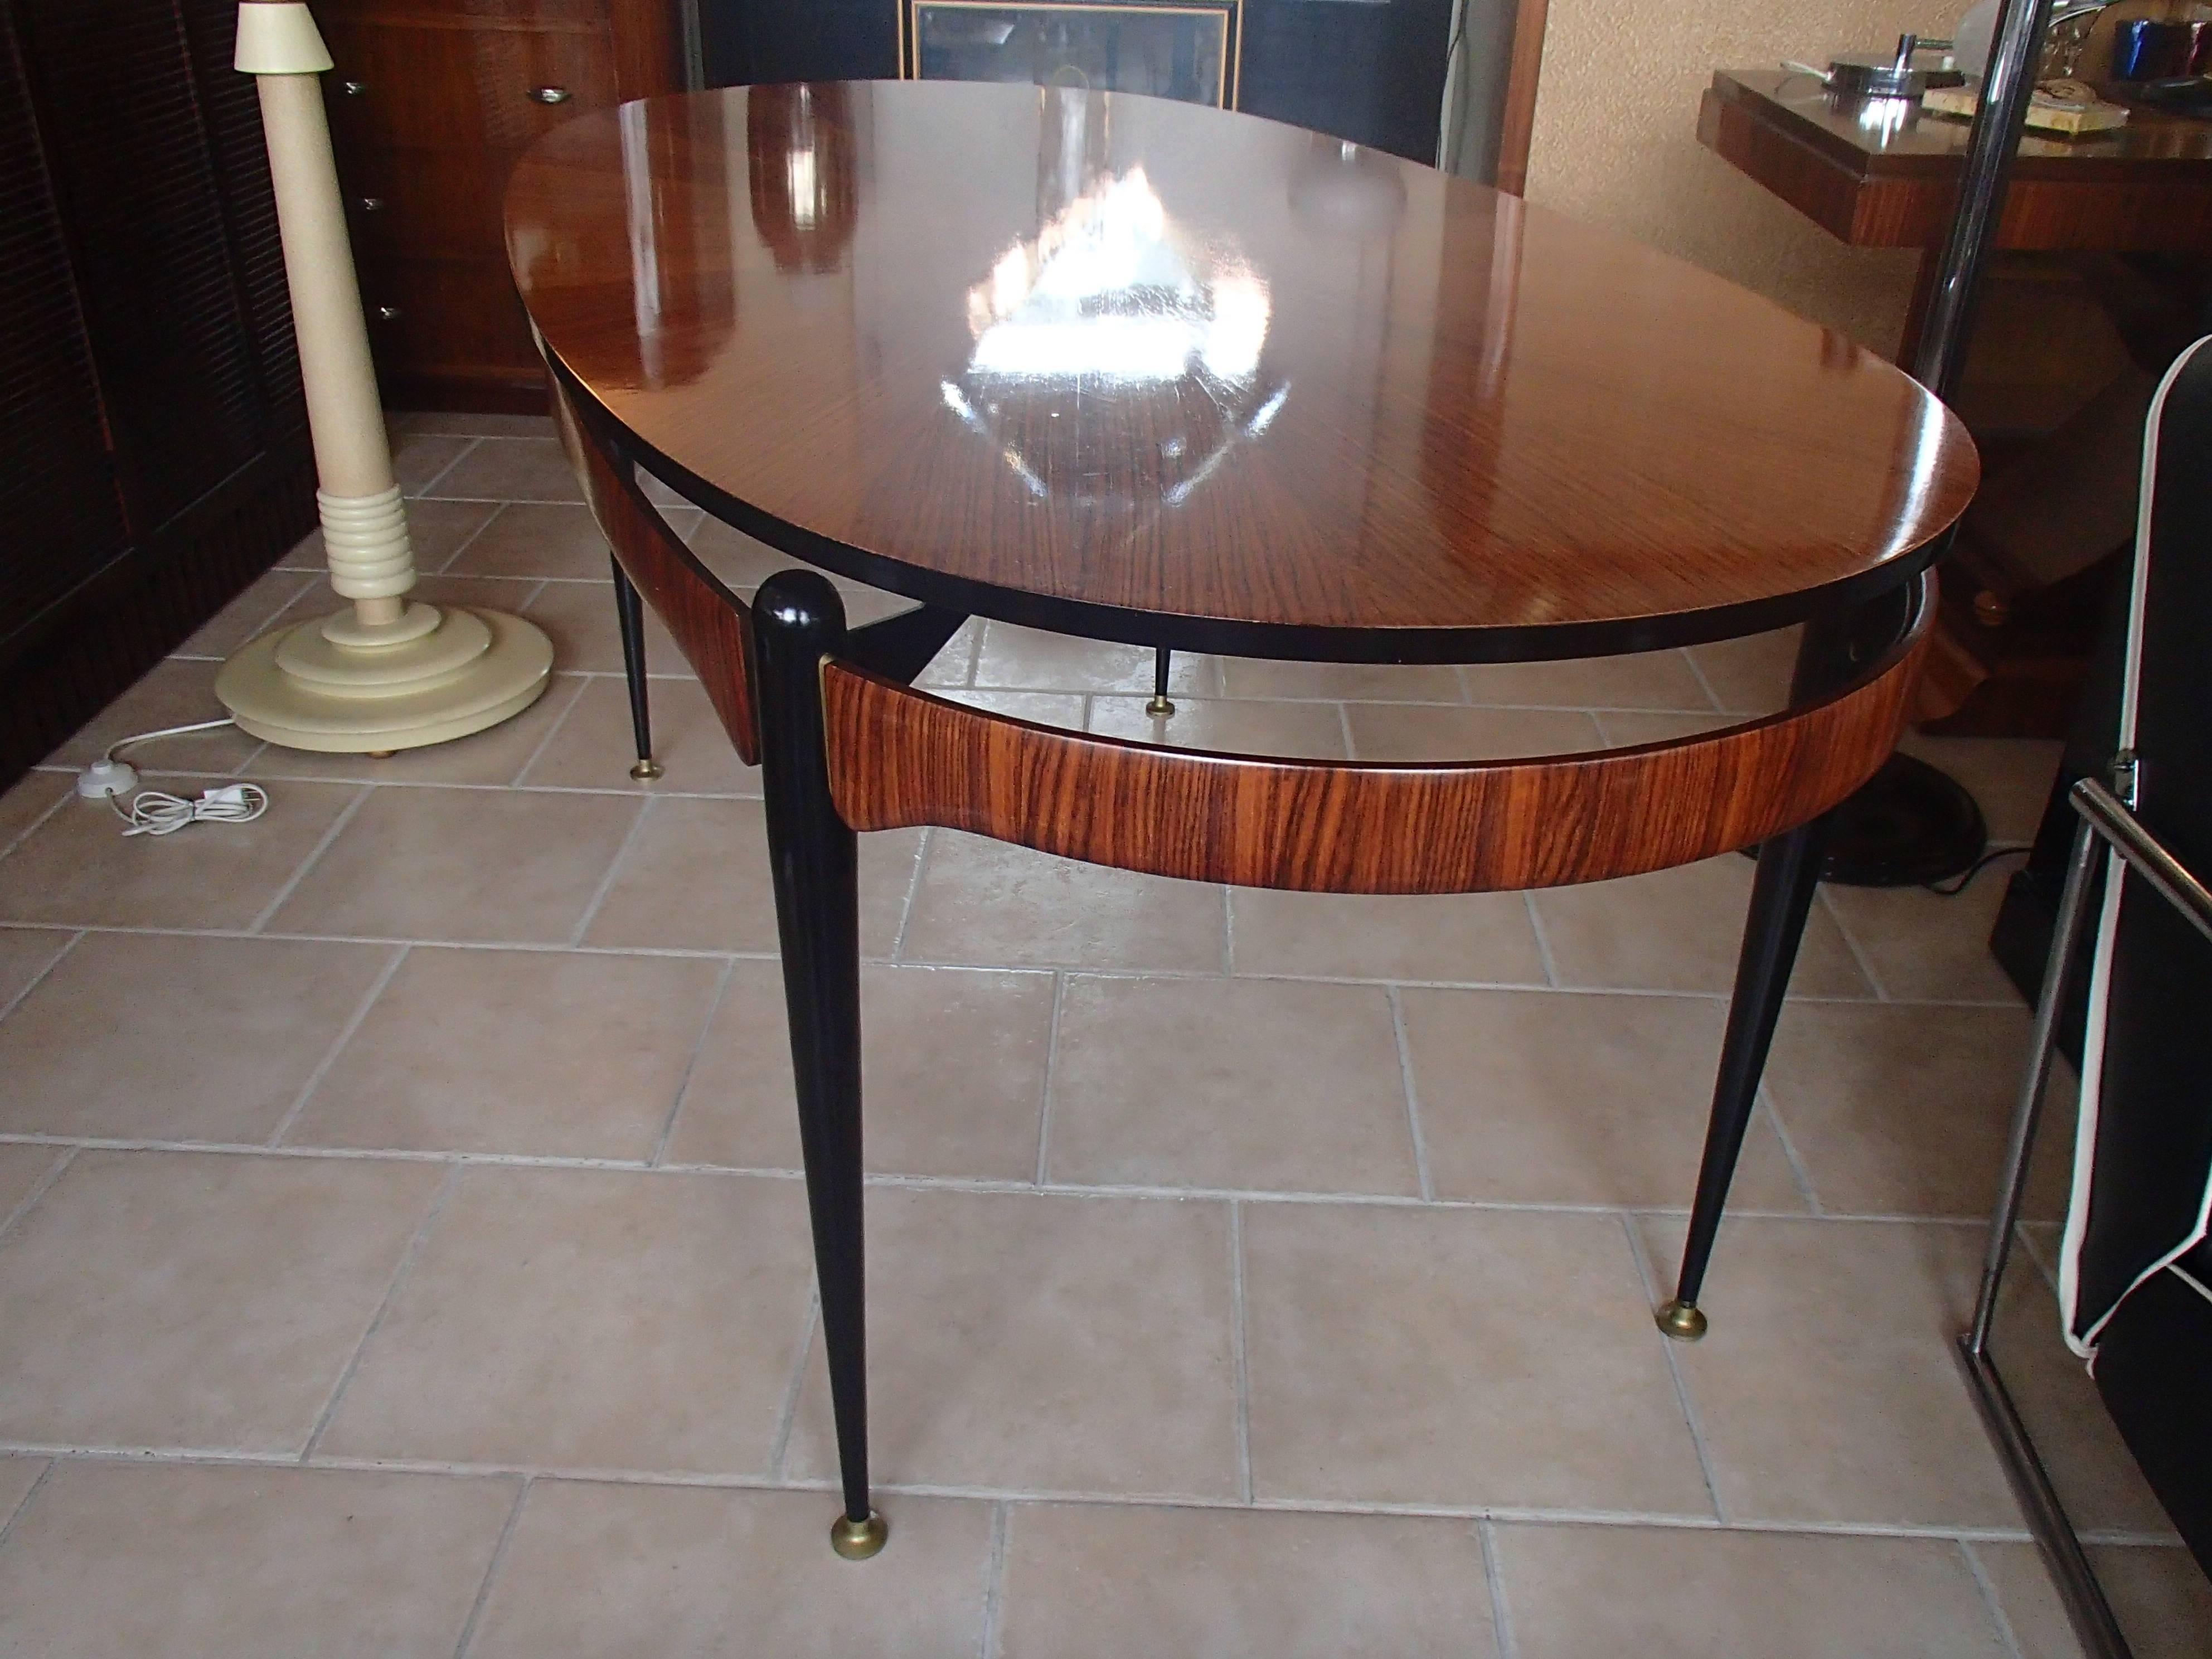 Very elegant rosewood dining table with black legs and brass ornaments.